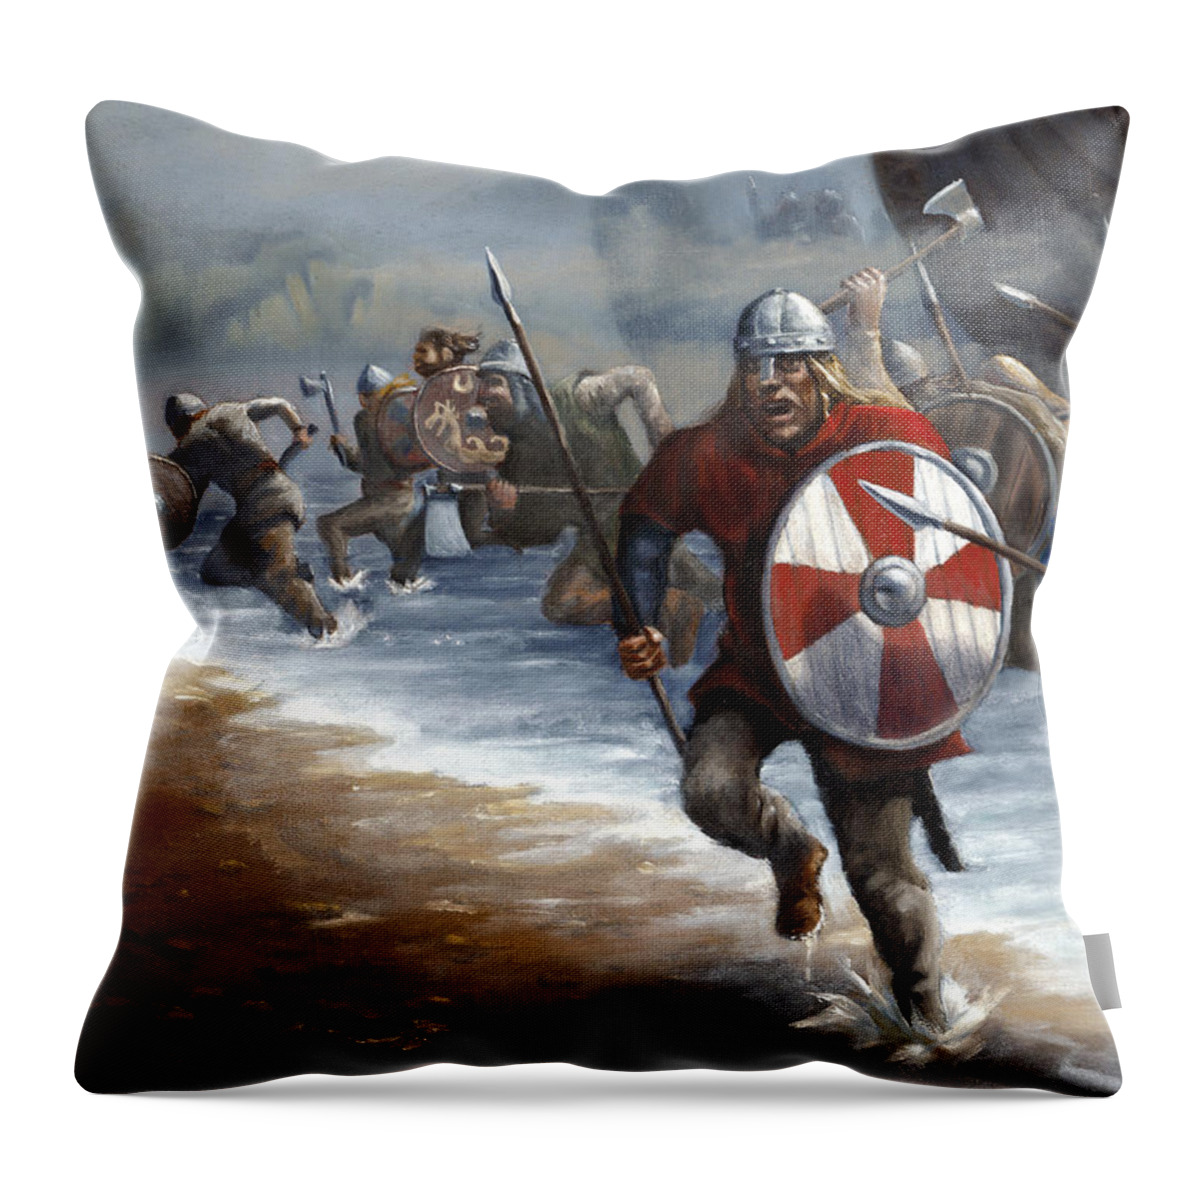 Vikings Throw Pillow featuring the painting Viking Assault by Ken Kvamme